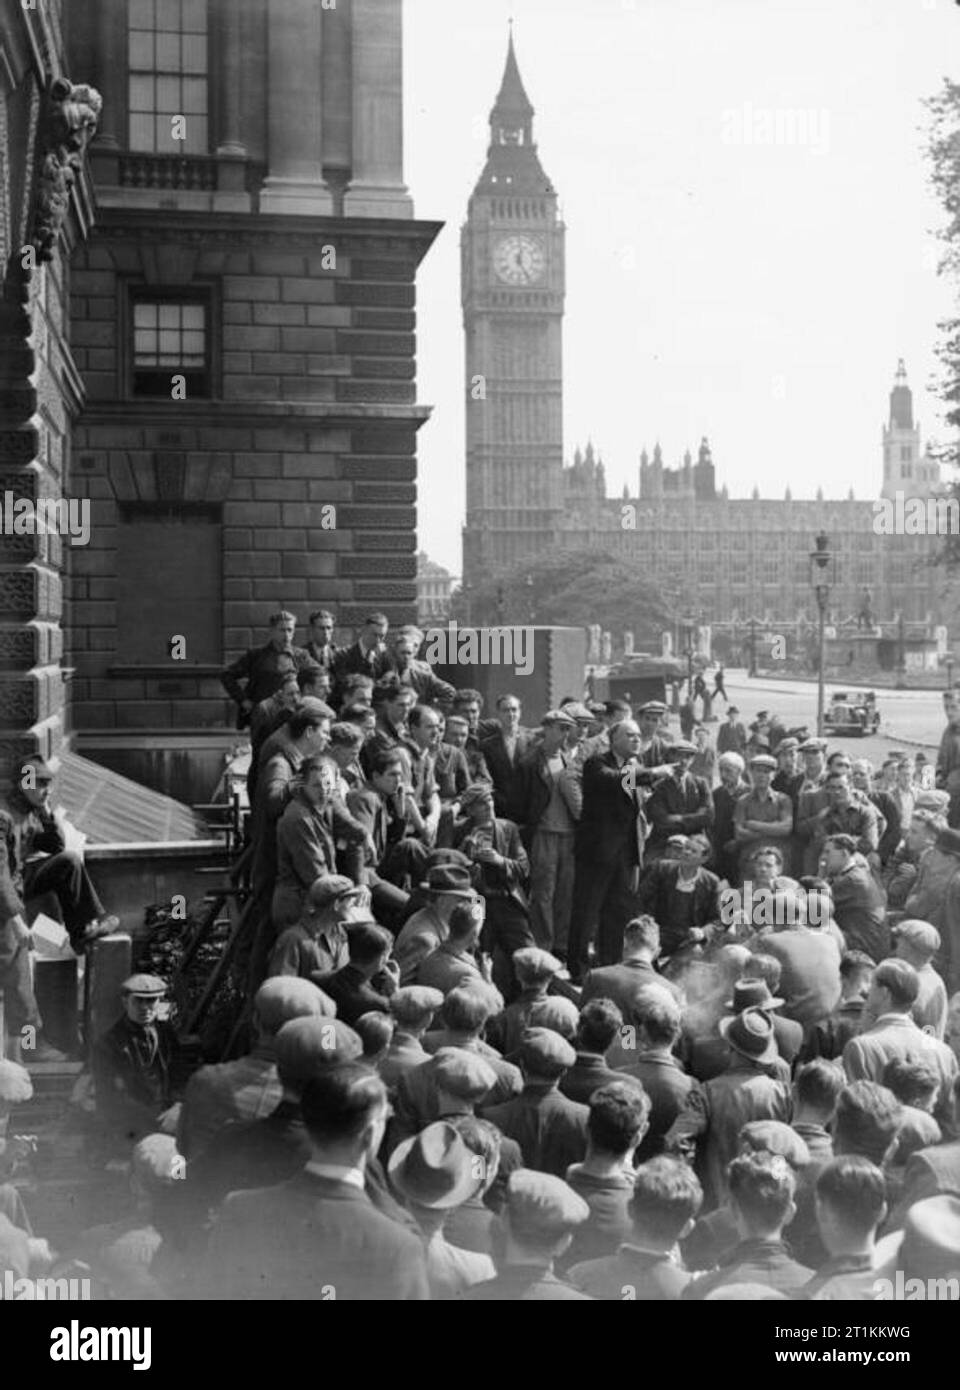 Harry Pollitt Speaks at Whitehall, London, England, 1941 Harry Pollitt, General Secretary of the Communist Party of Great Britain, gives a speech to workers in Whitehall, London, 1941. Big Ben can be clearly seen behind him. Stock Photo